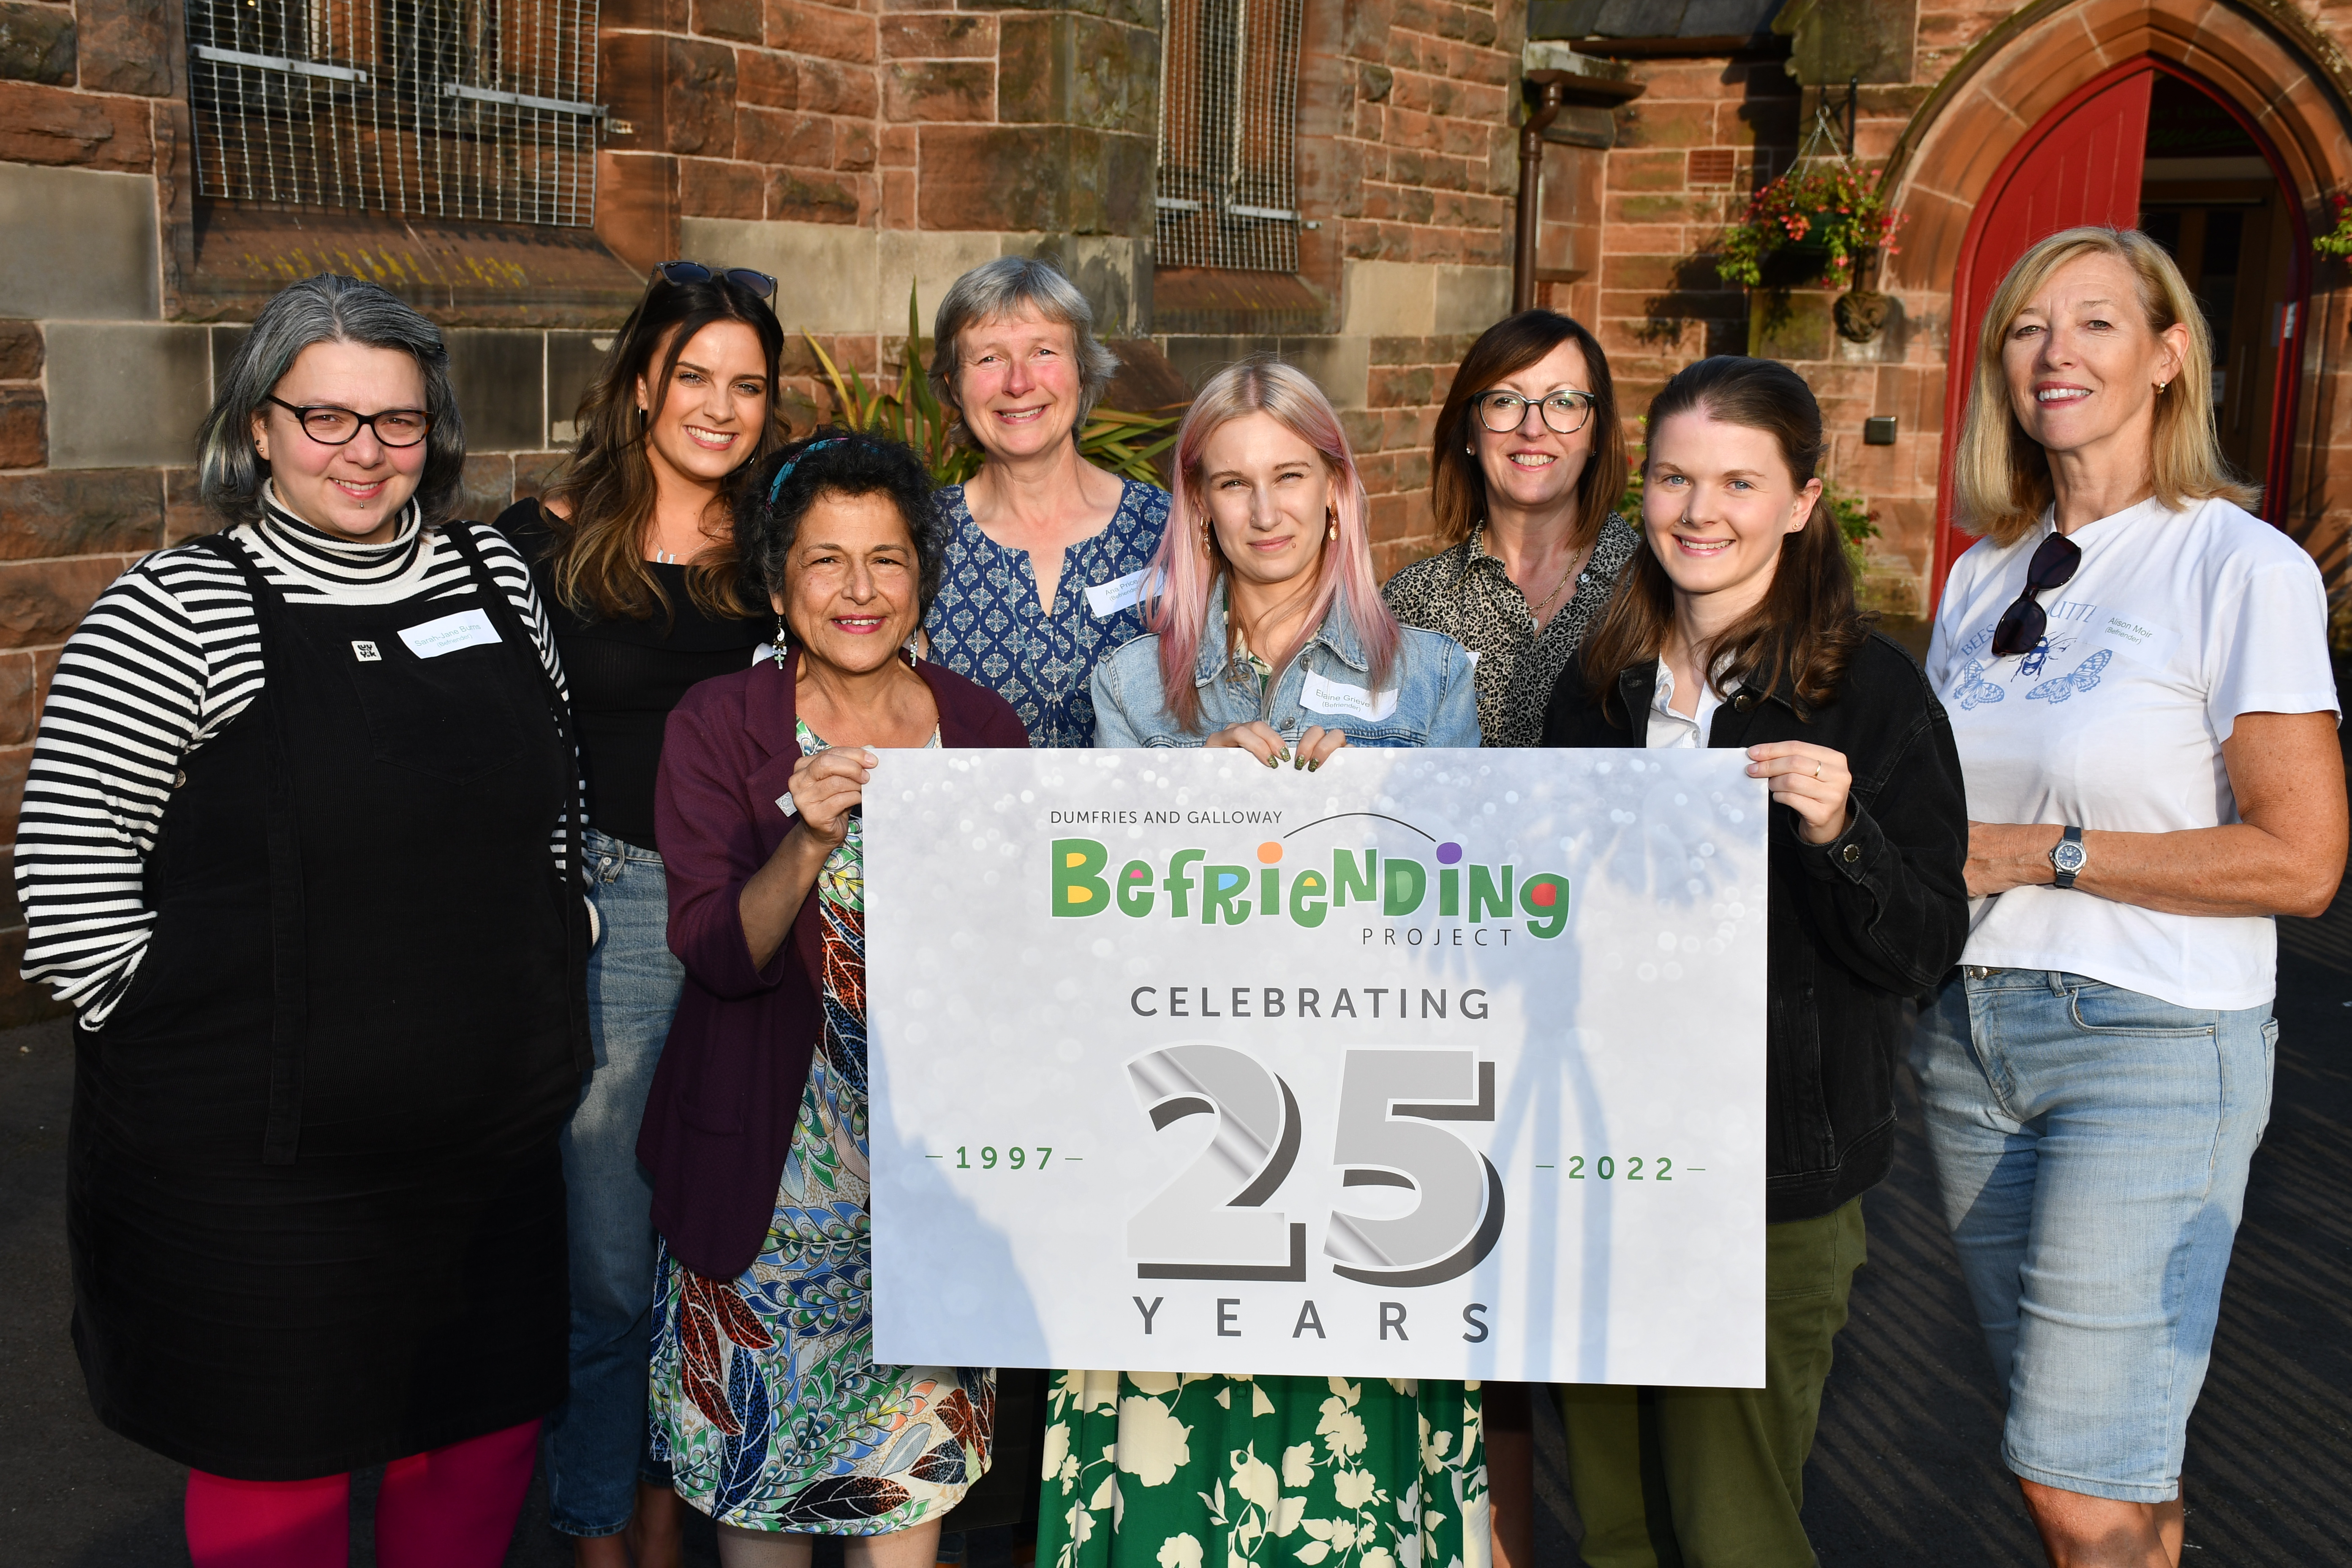 Some of the befrienders who volunteer with the Dumfries & Galloway Befriending Project with a 25th anniversary banner.